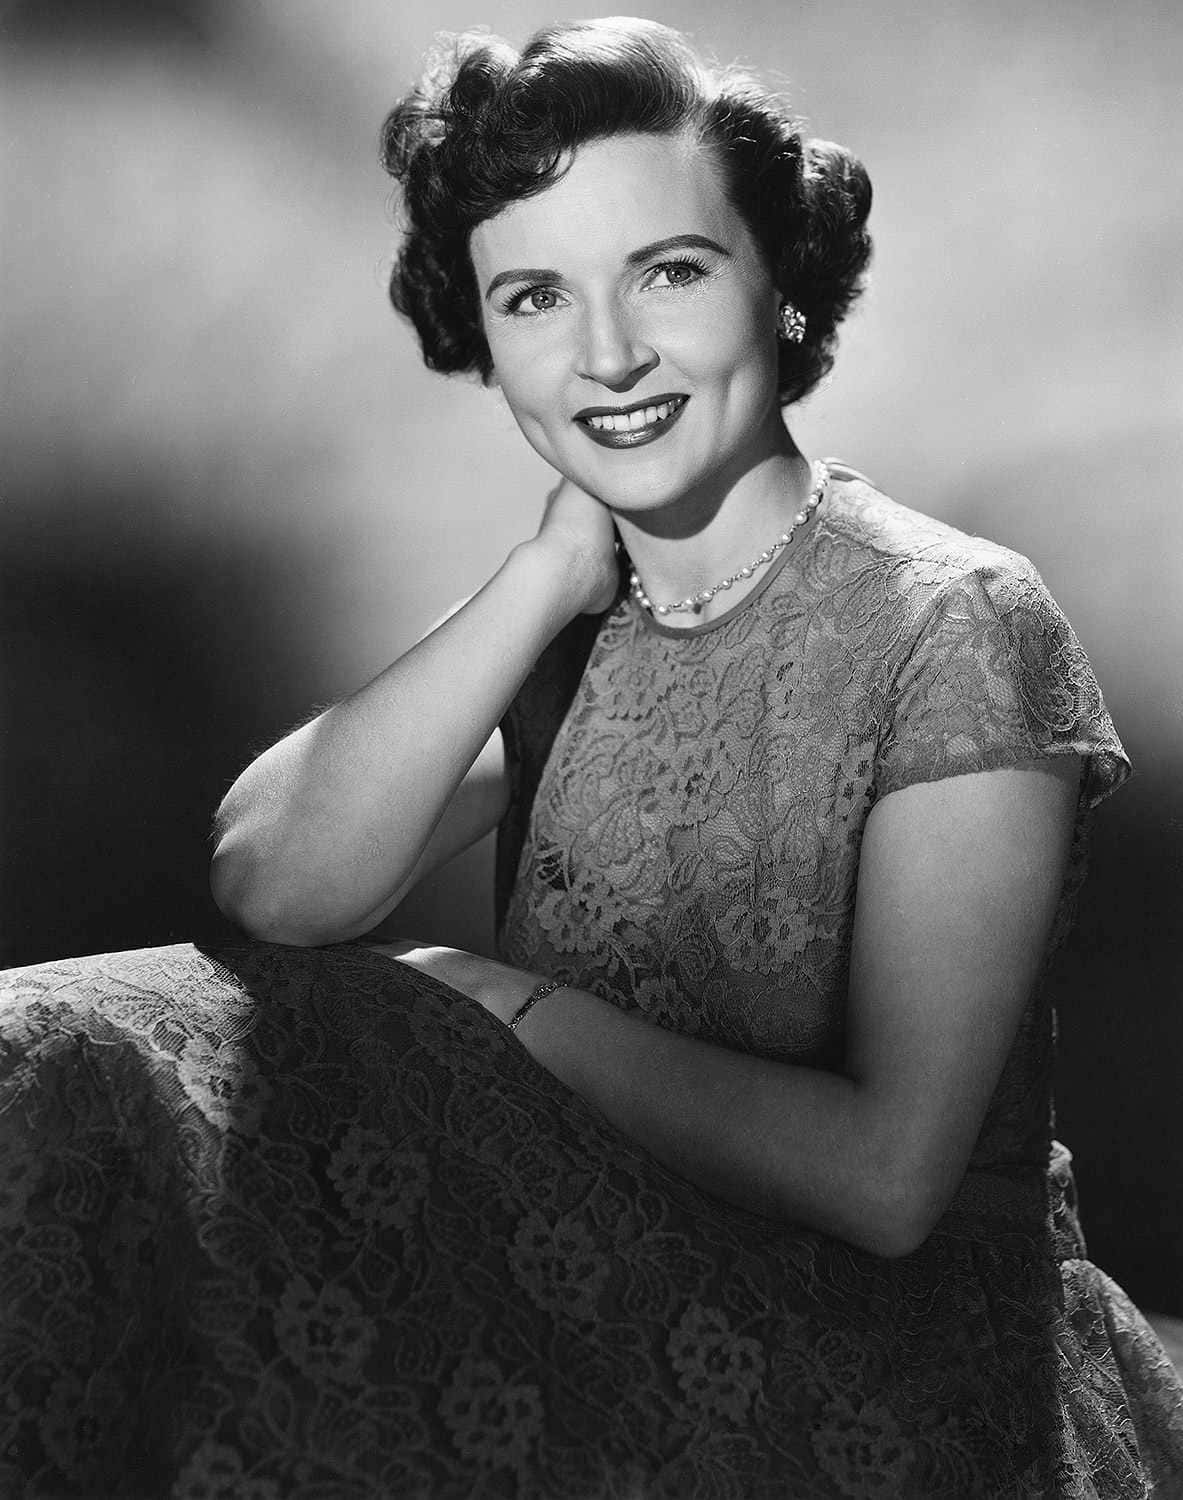 A Radiant Smile from Hollywood's Golden Lady, Betty White